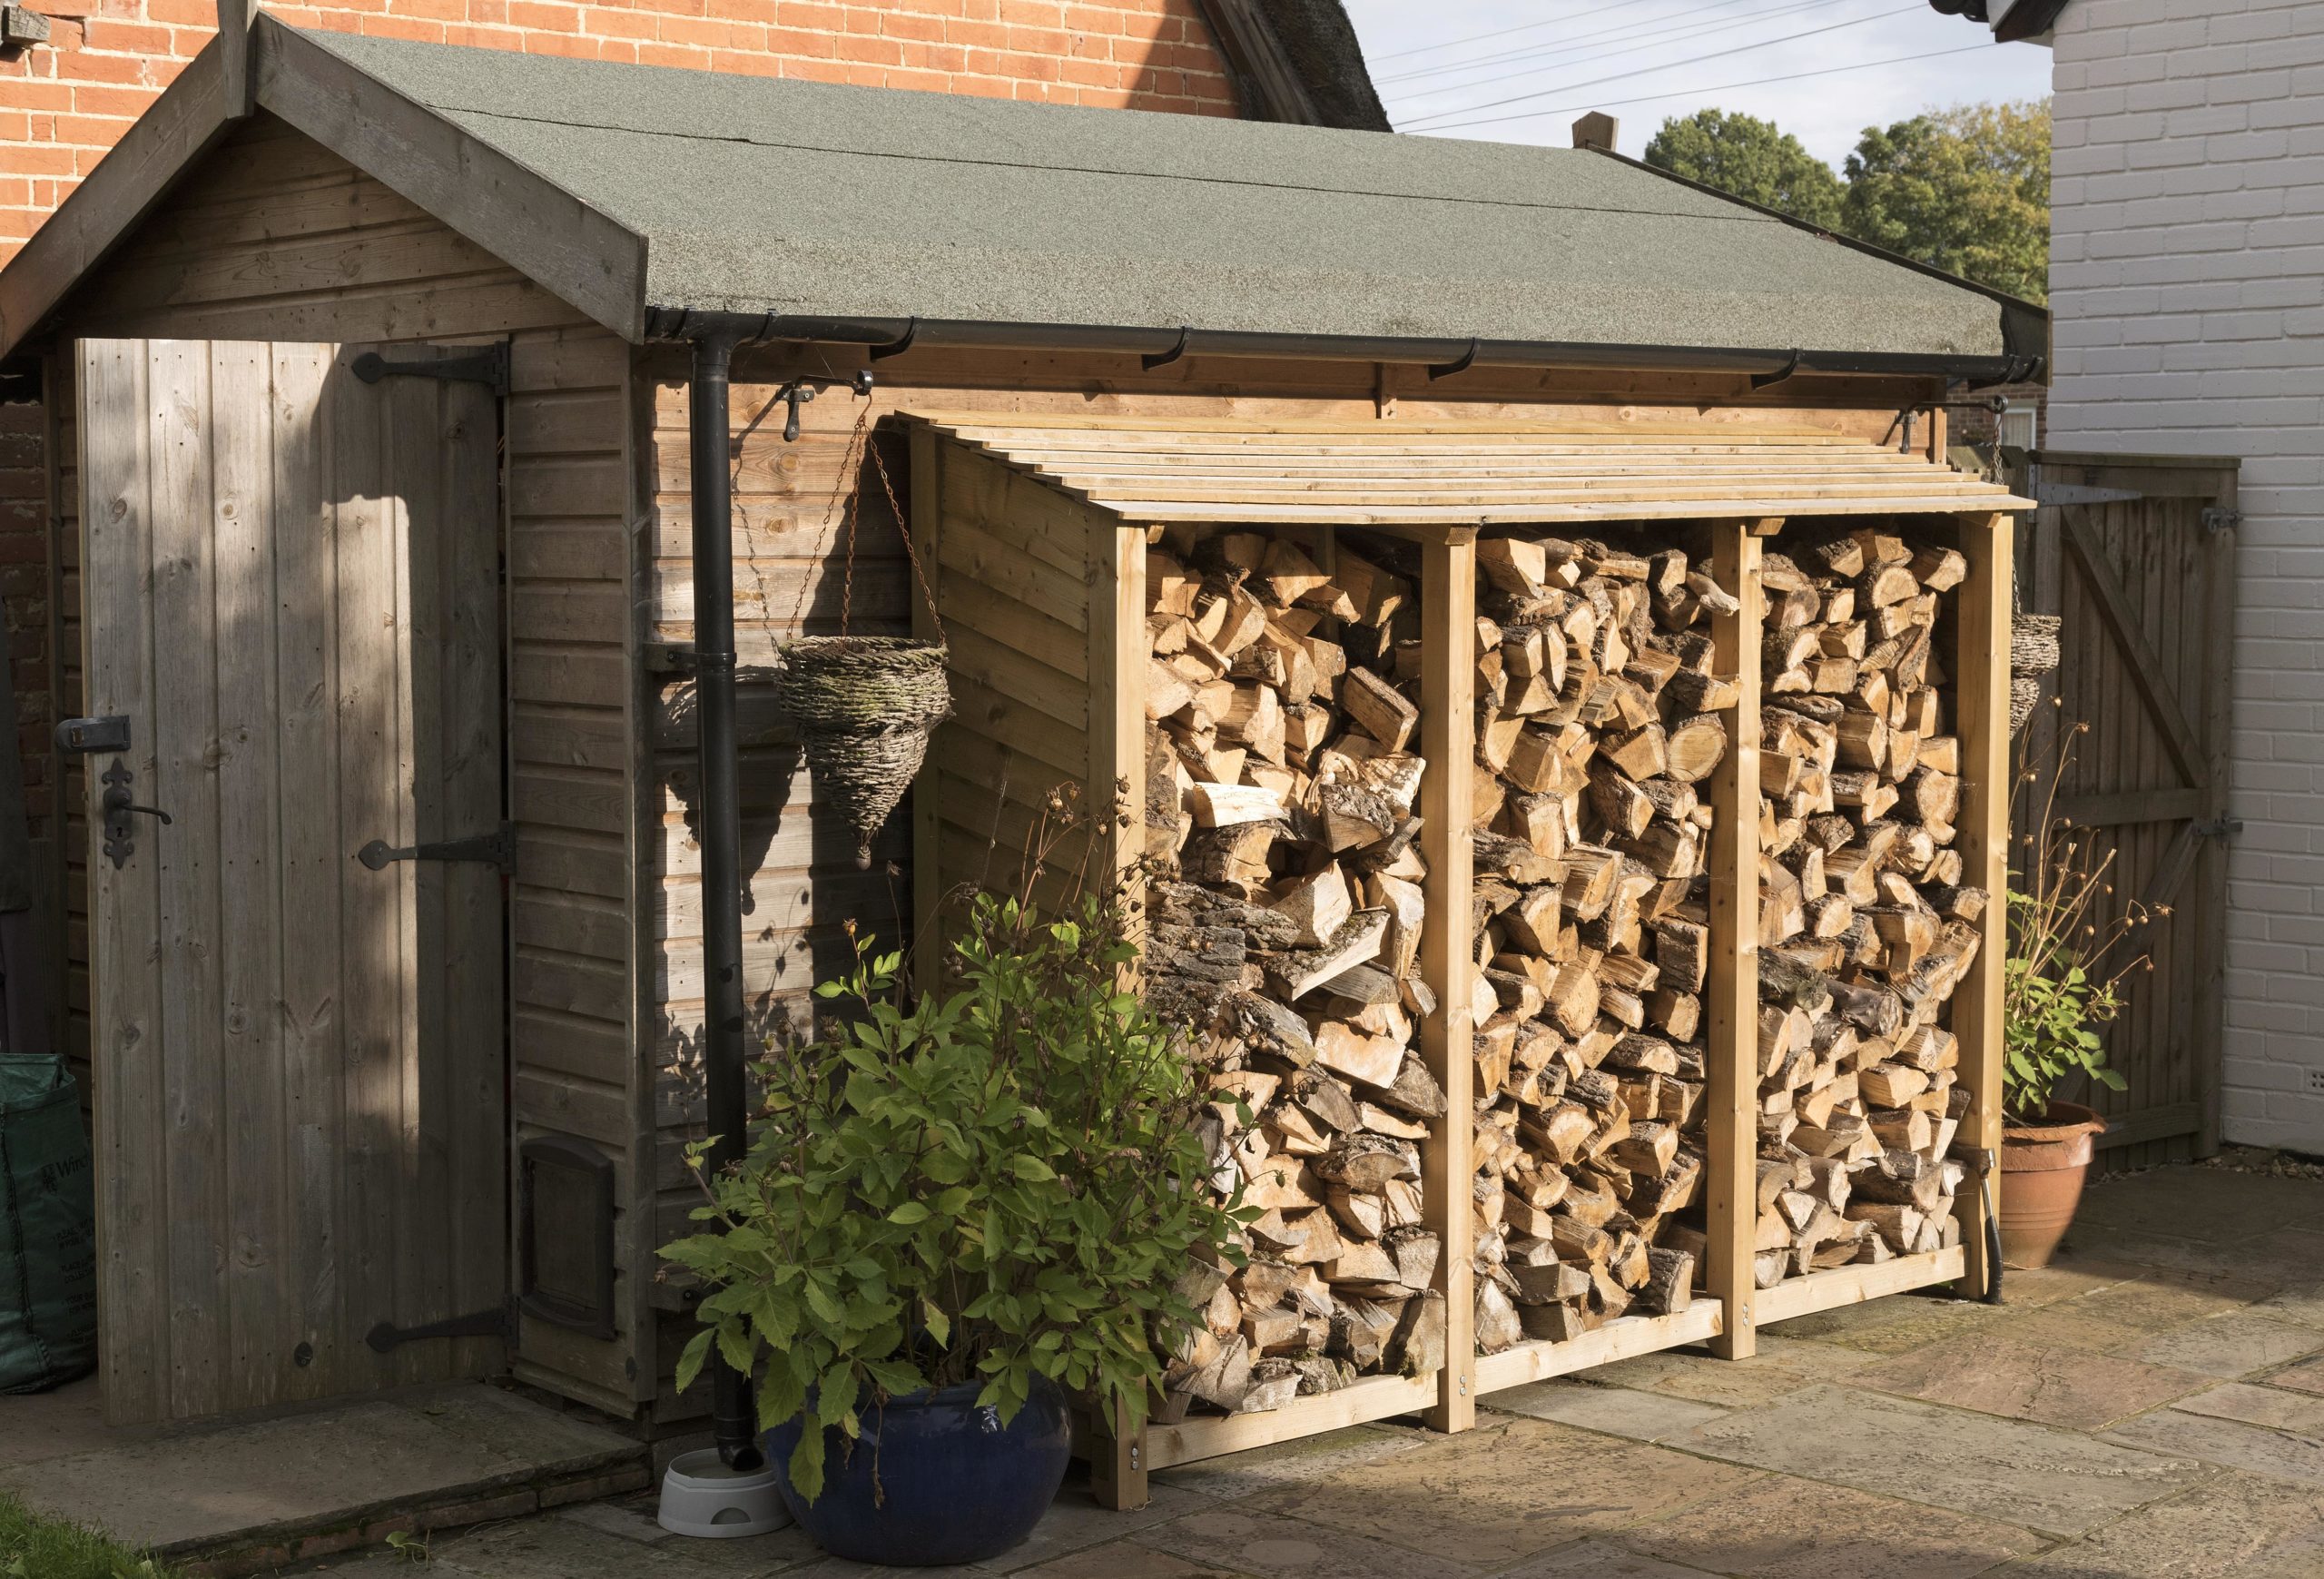 firewood being stored safely next to garden shed